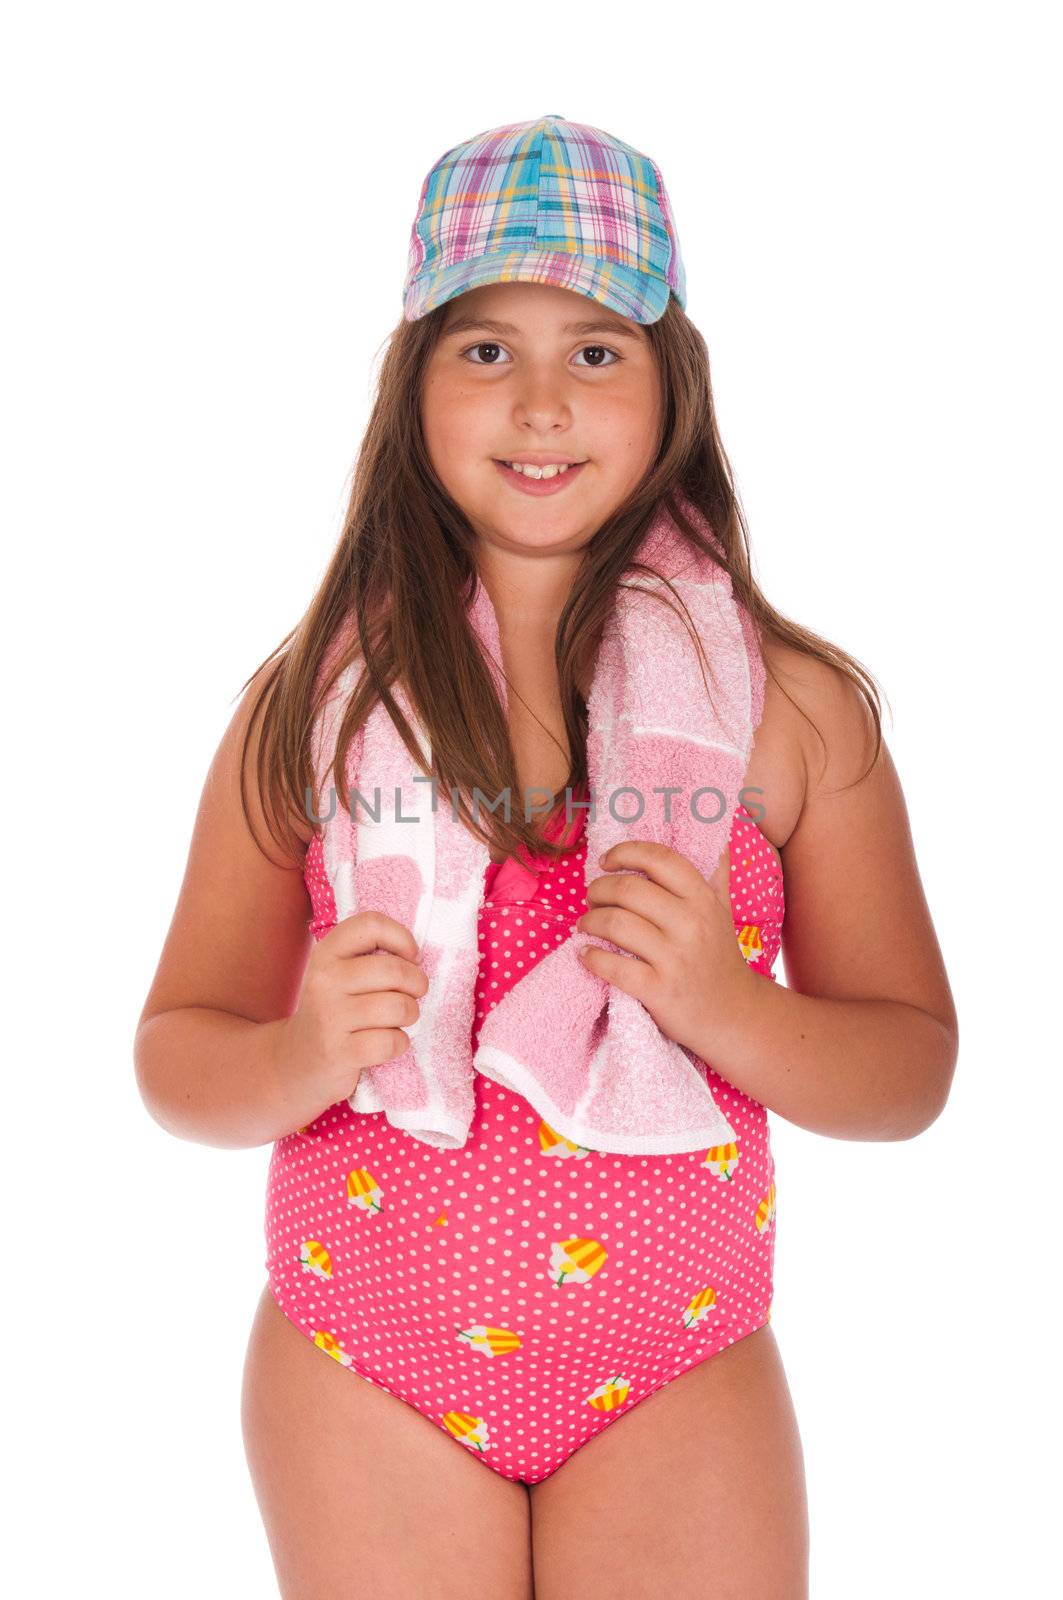 beautiful brunette teenage girl in swimsuit ready for the beach or pool with cap and towel (isolated on white background)